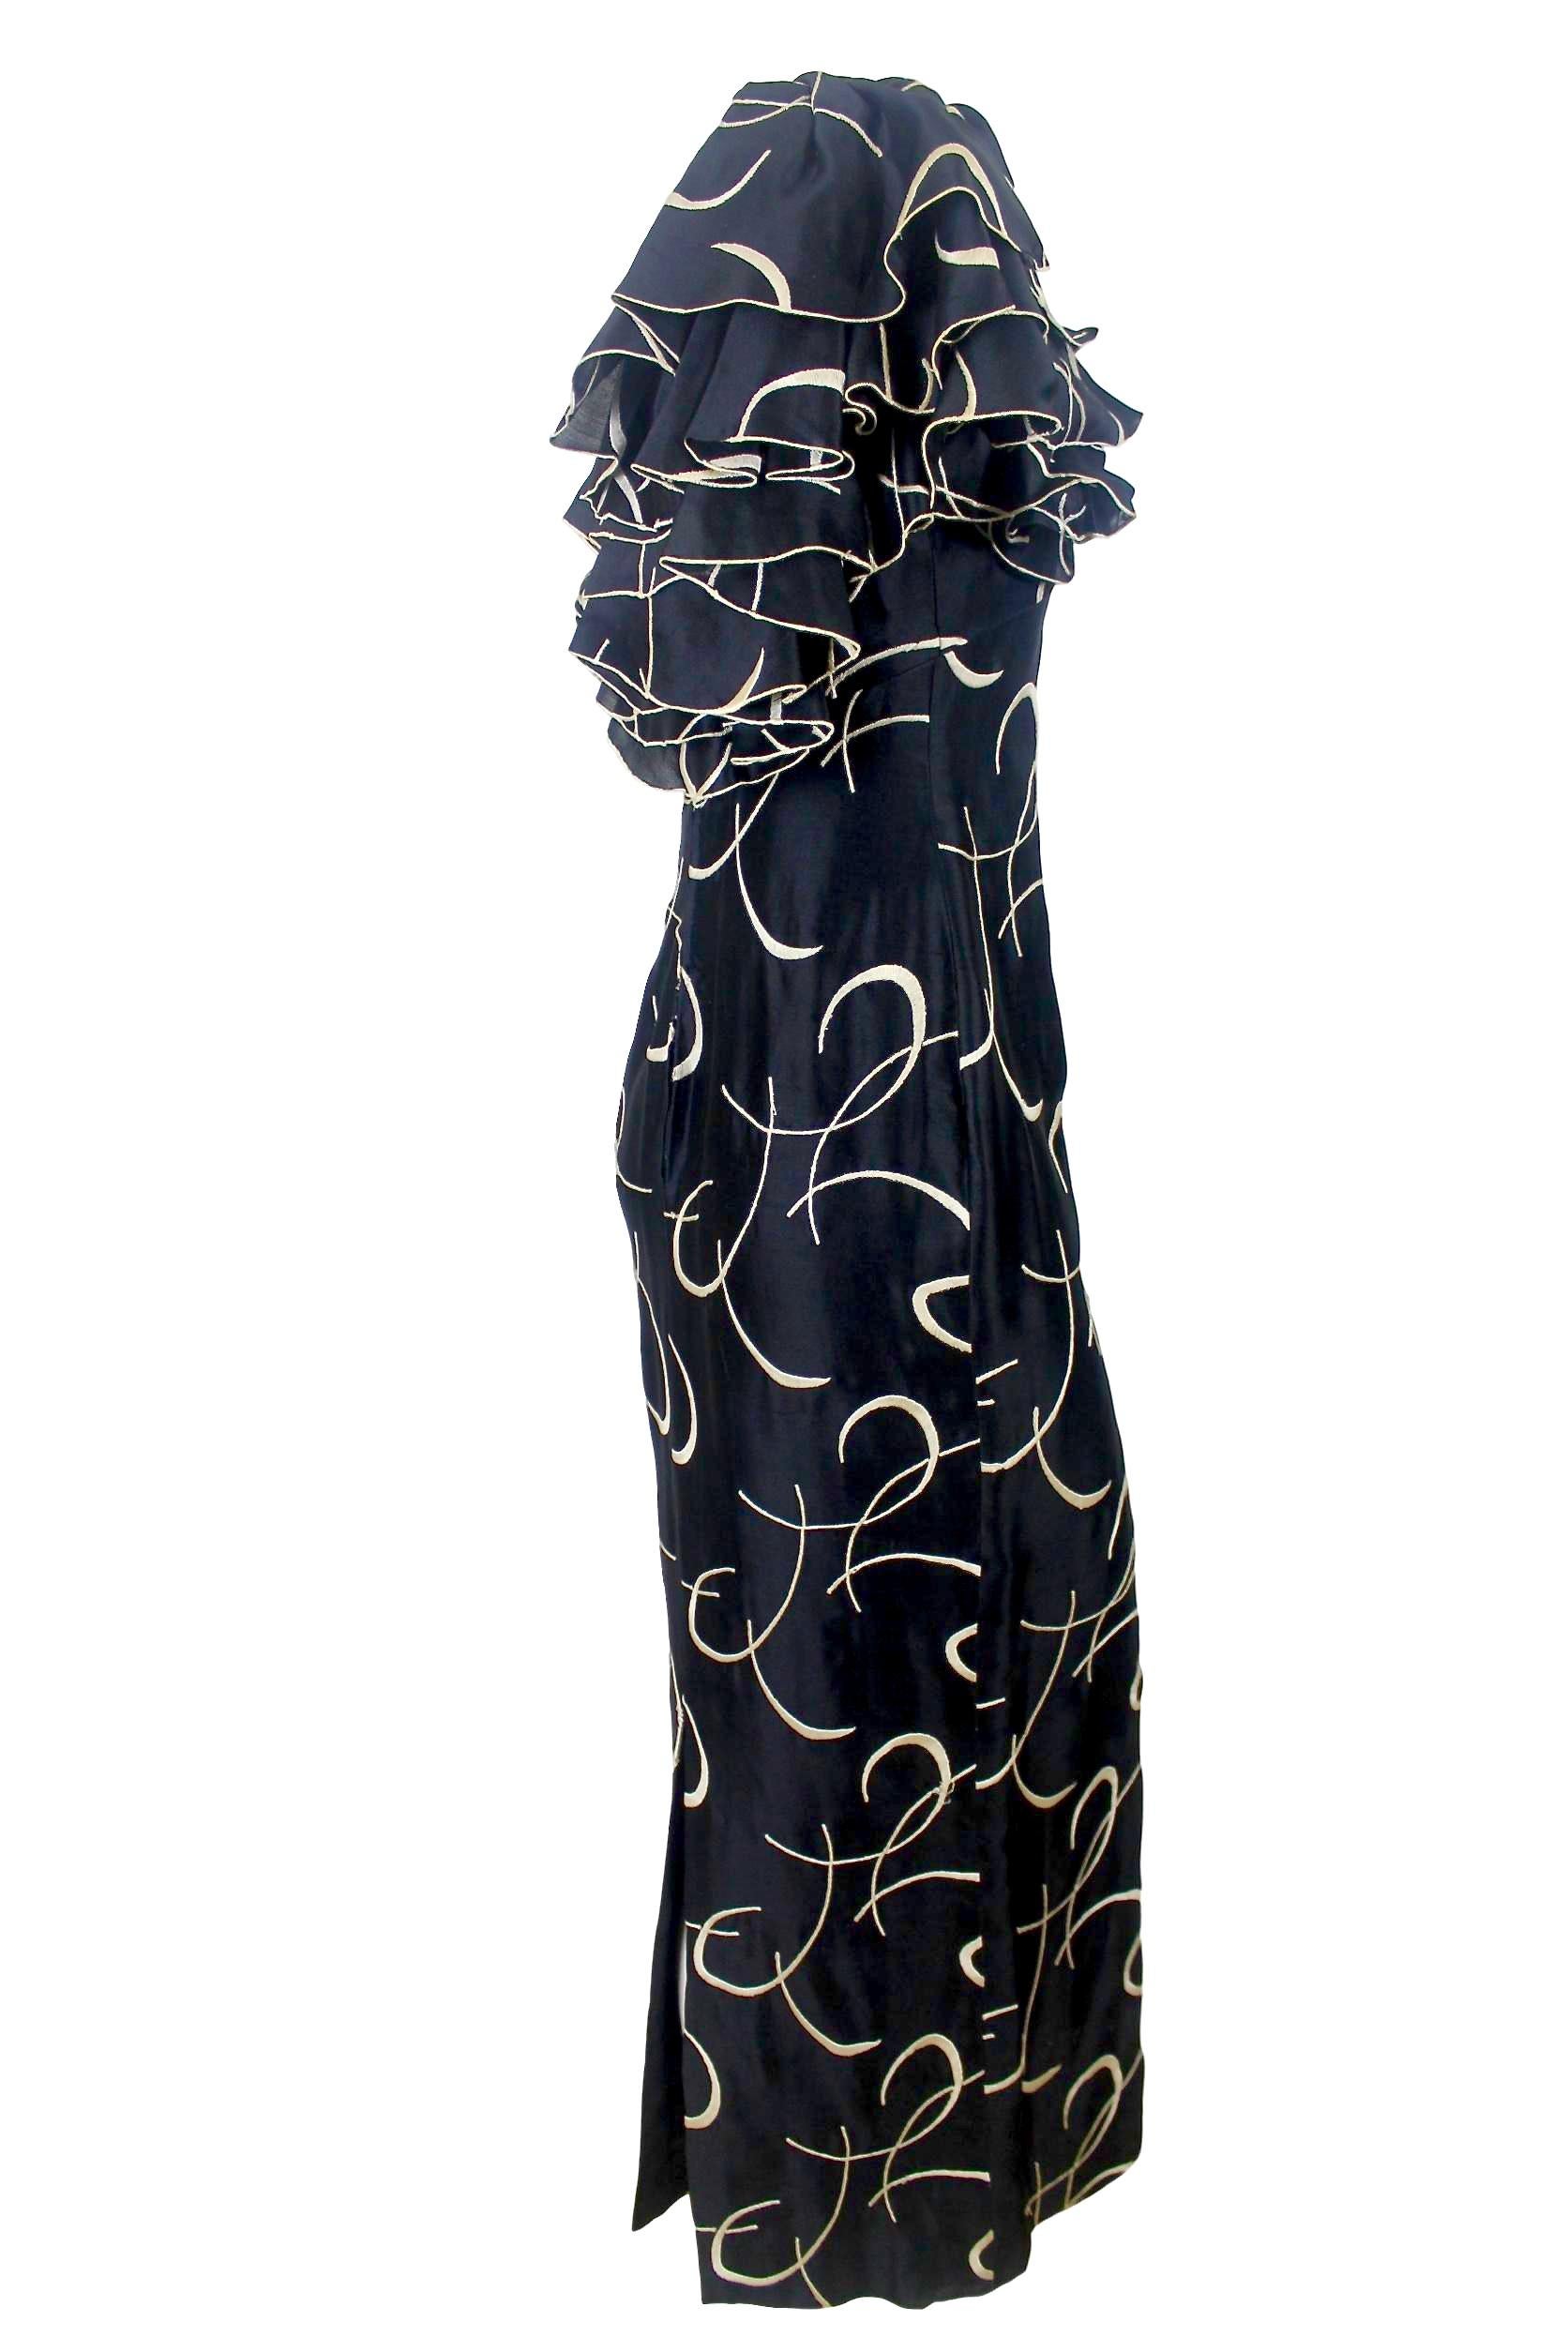 Loris Azzaro Couture Silk Embroidered Evening Dress For Sale 10